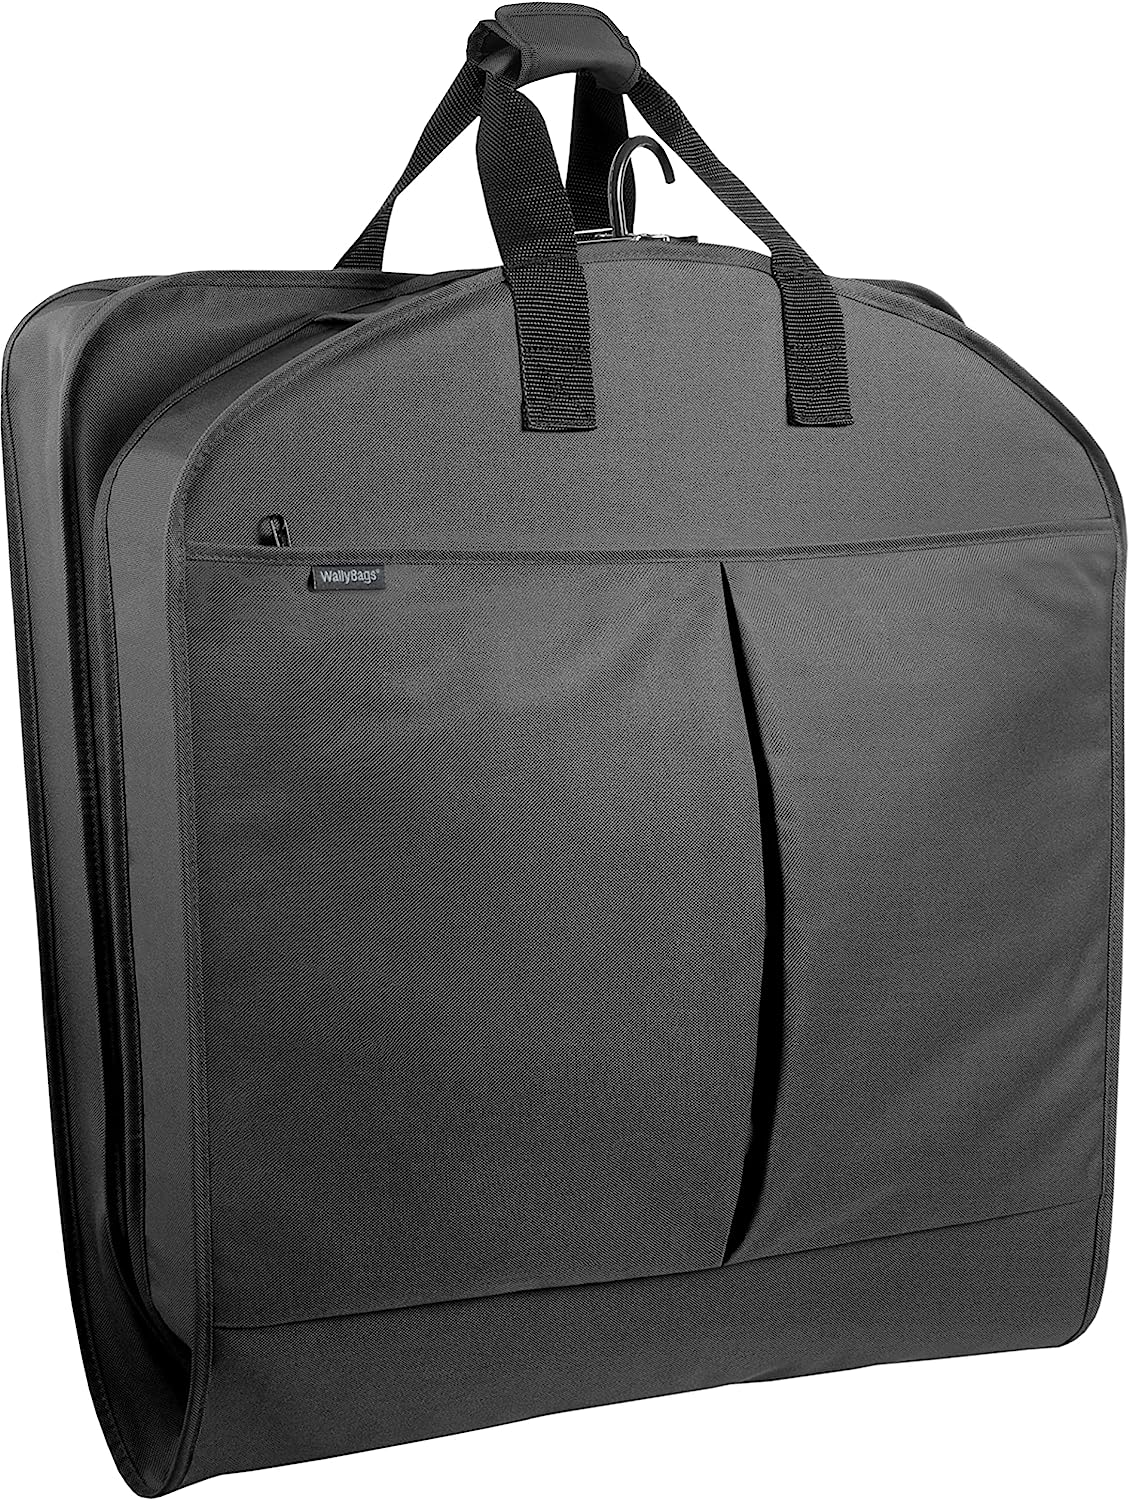 Travel Dress Garment Bag and Women's Tote, Black w/Lining, 2-Piece Set (52-inch)